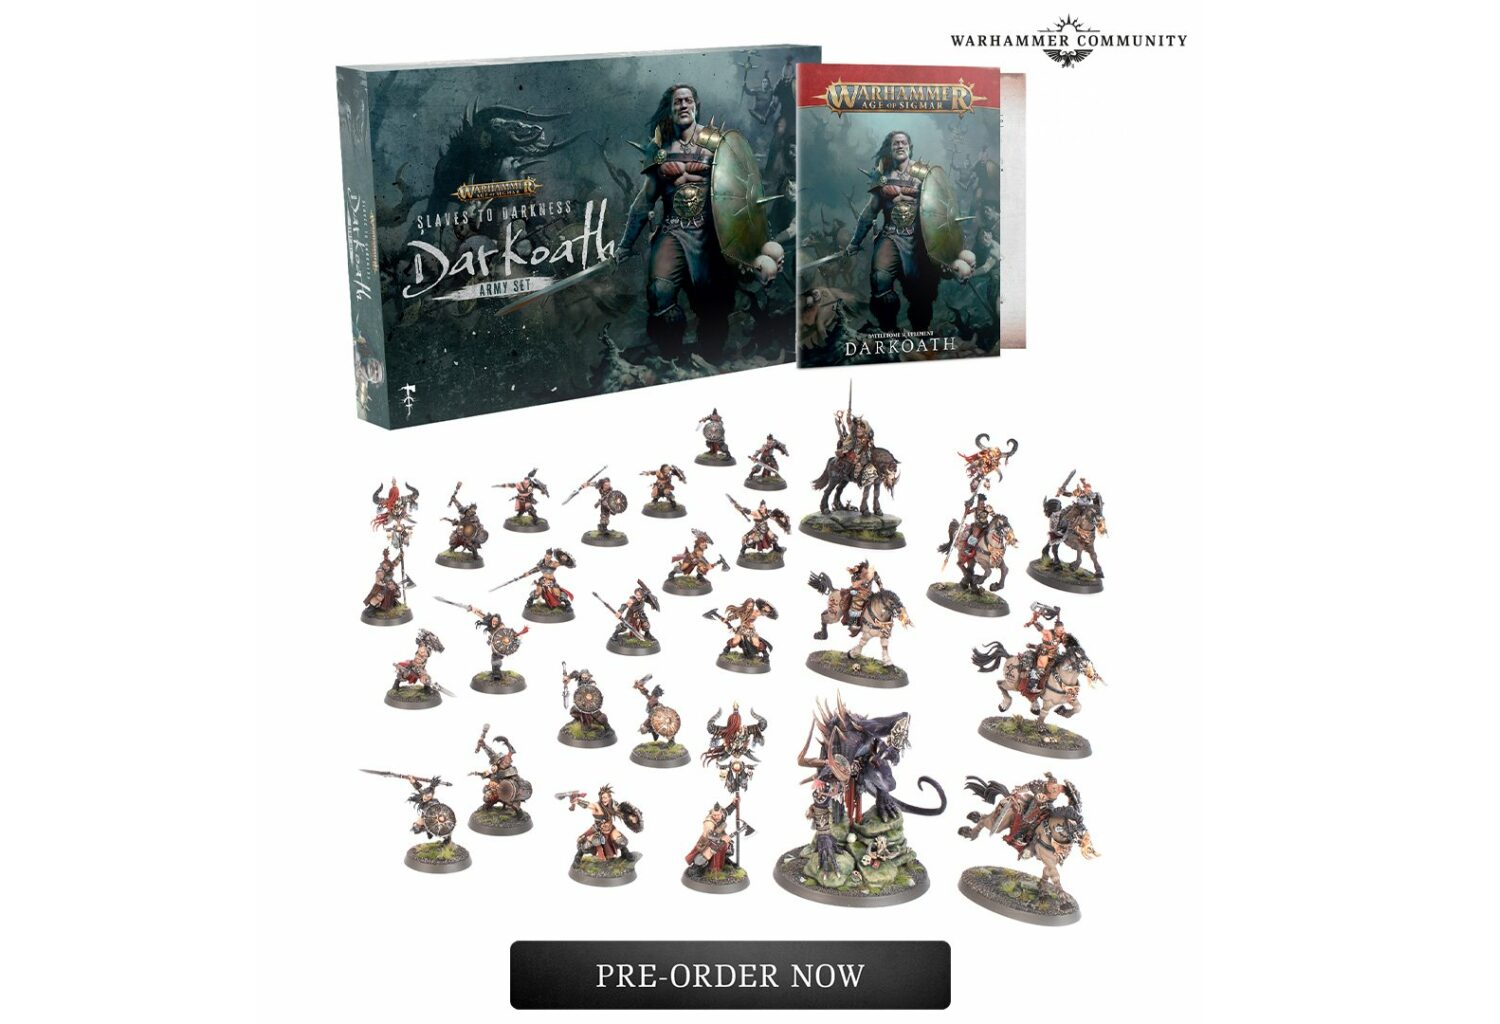 Speculating Wildly About Warcry and the New AoS Darkoath Army Set